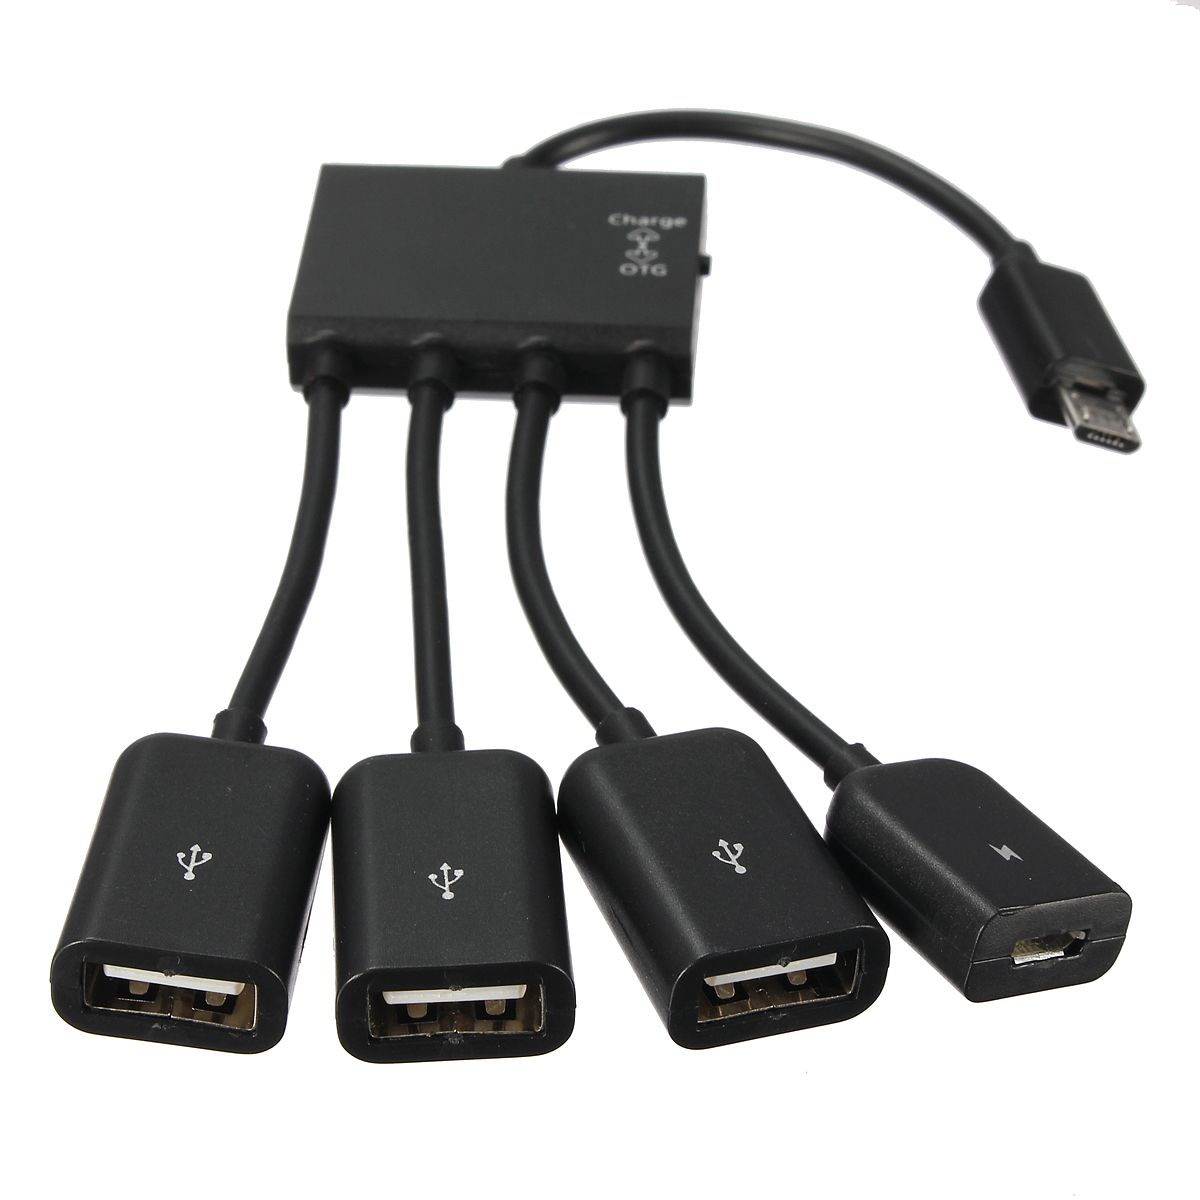 4-Port-Micro-USB-OTG-Hub-Adapter-Cable-Data-Line-Power-Charging-for-Galaxy-S5-S4-S3-Google-Nexus-947726